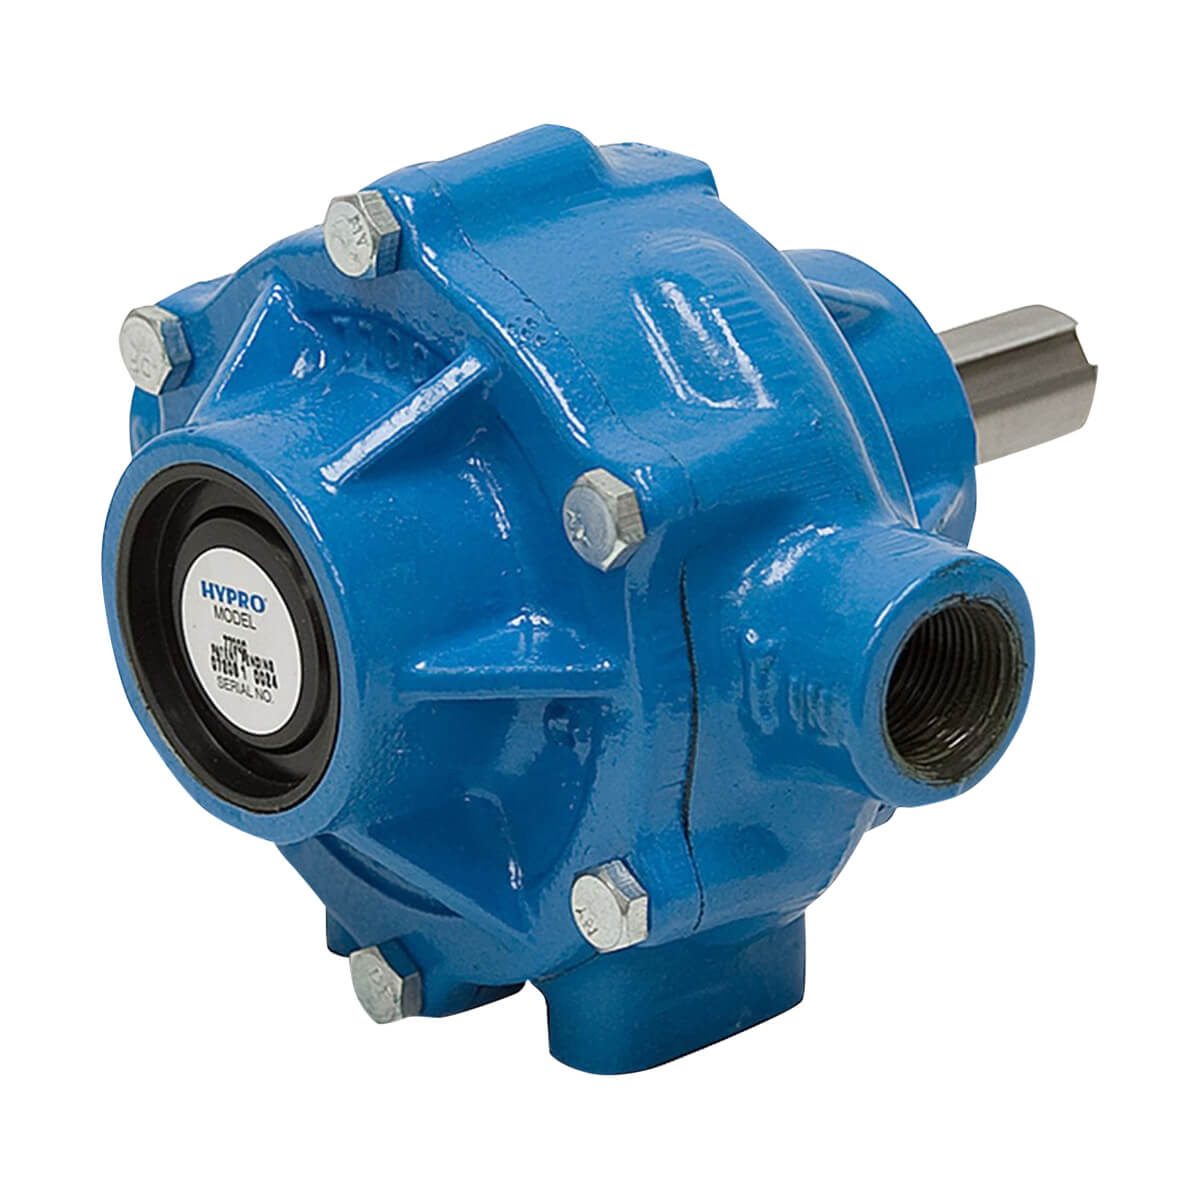 7700C Hypro 7 Rollers Pump - 14.2 GPM Cast Iron